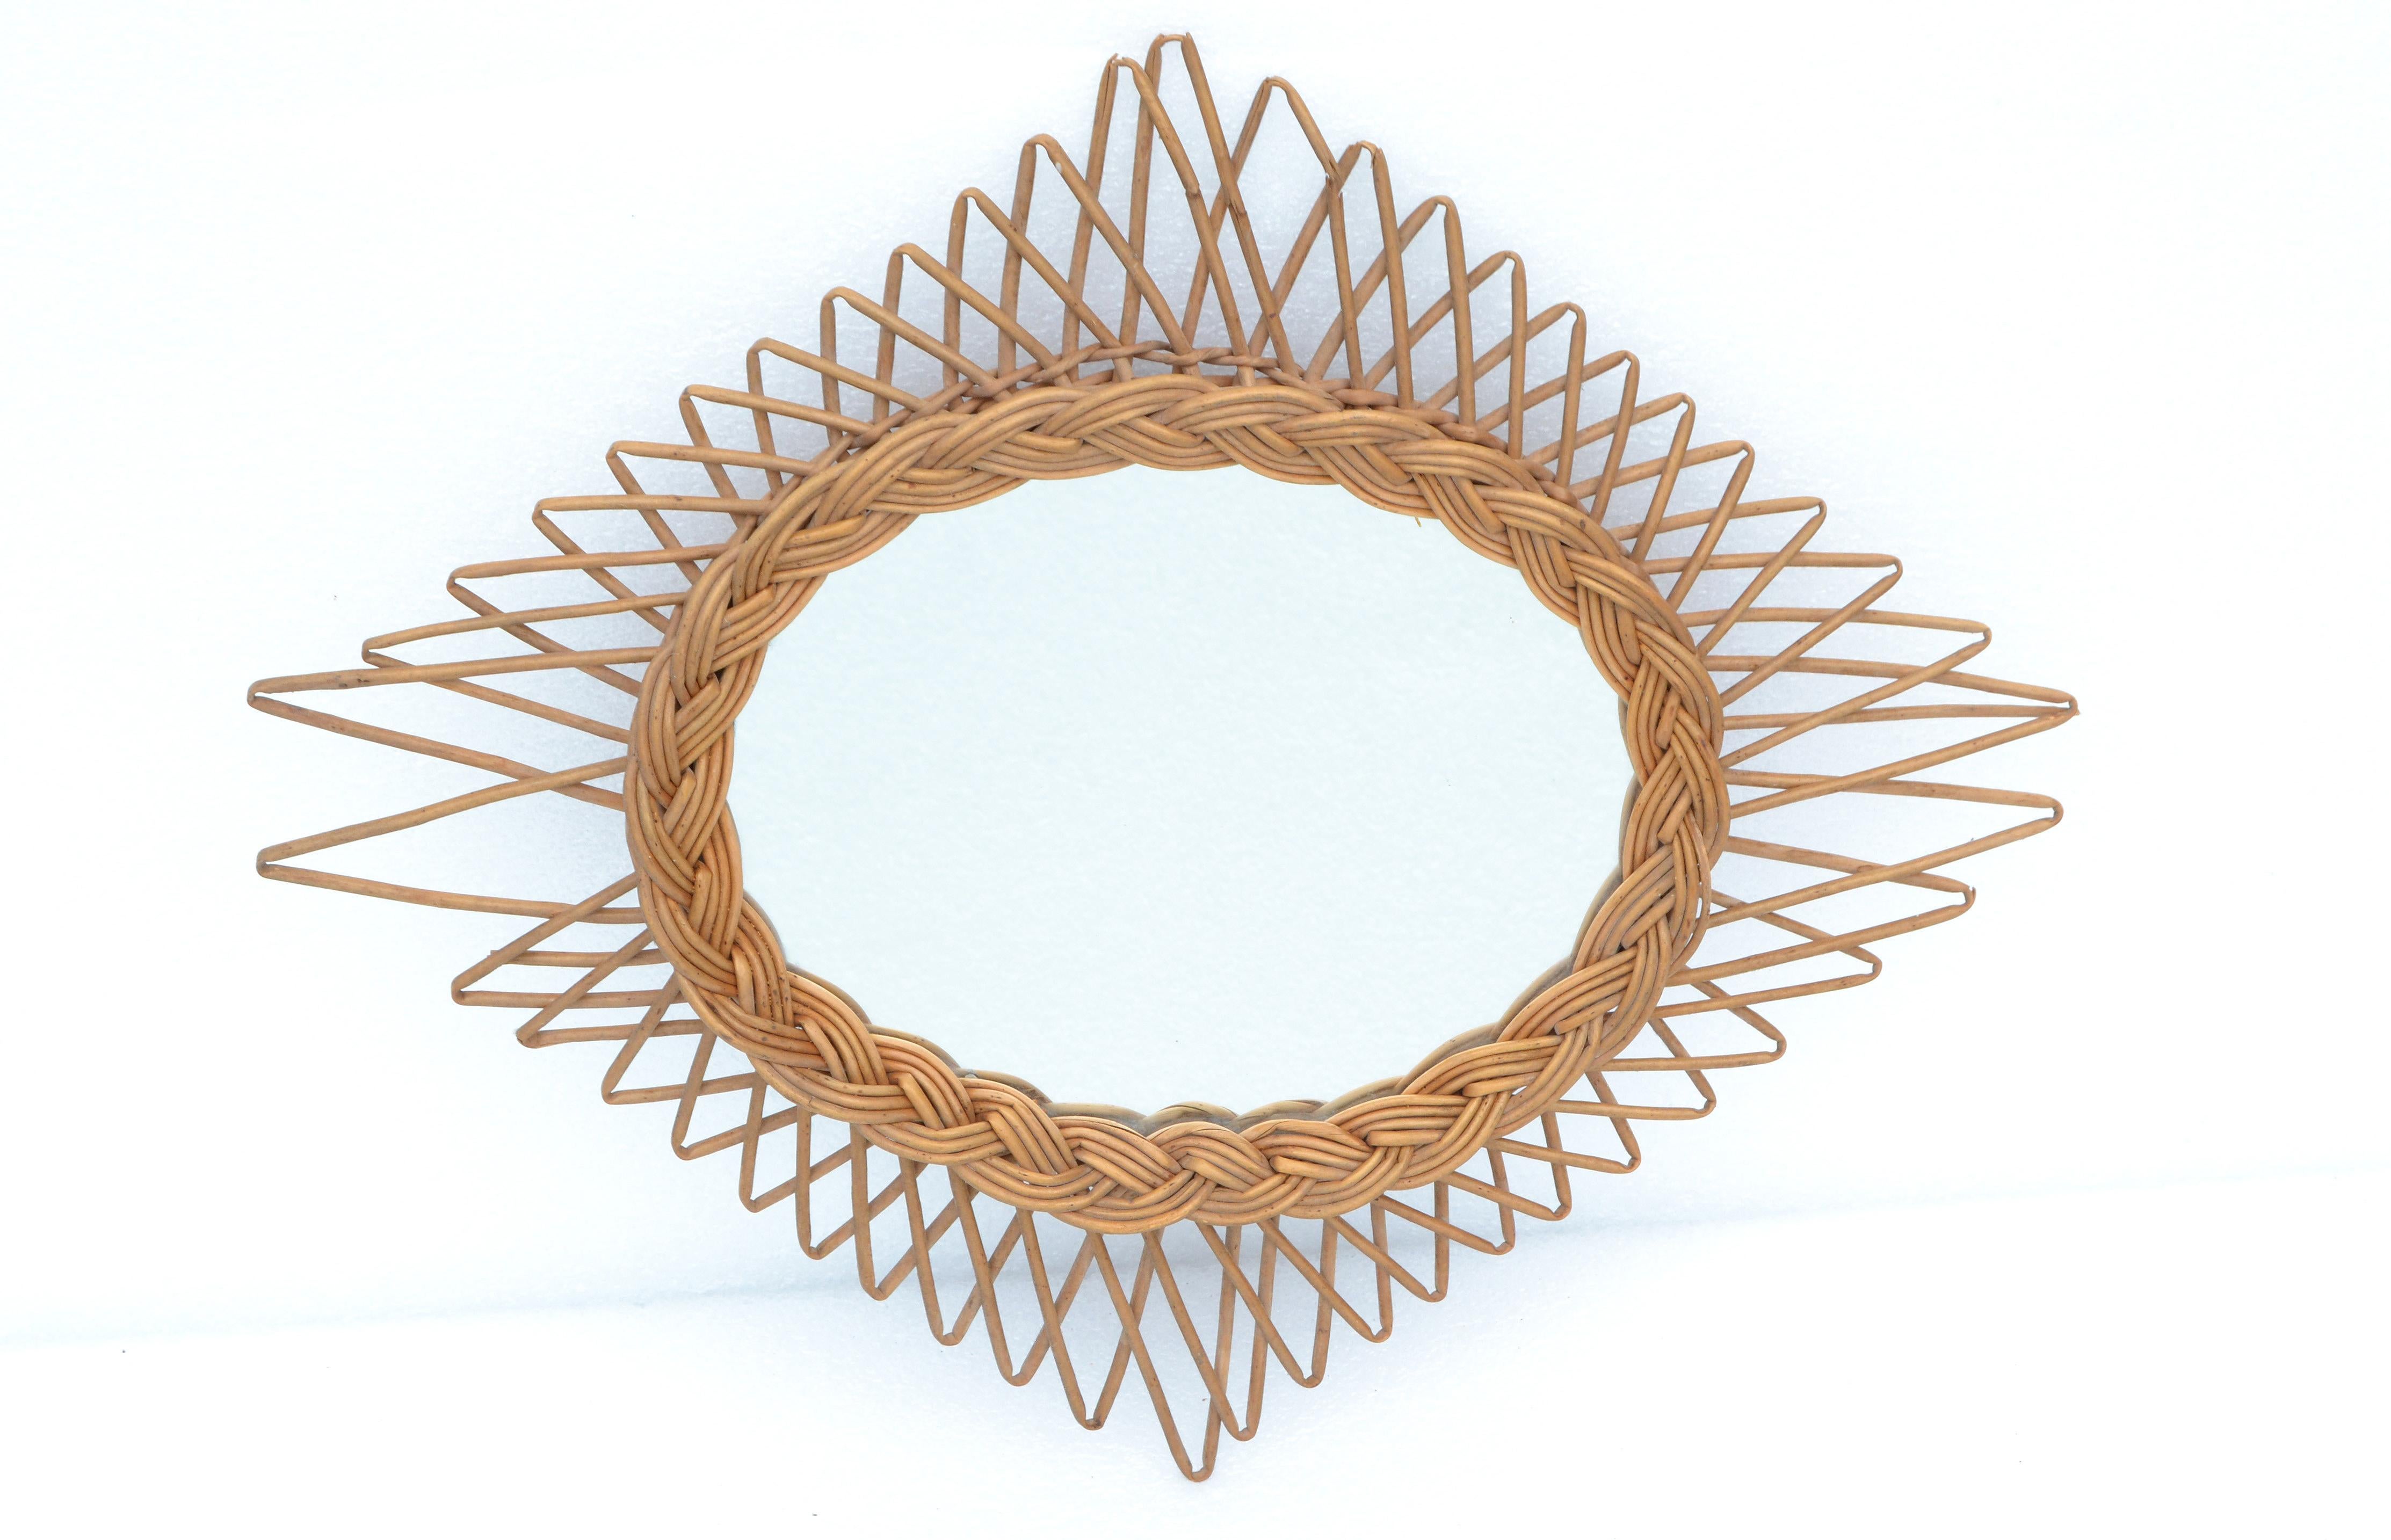 Mid-Century Modern wicker wall mirror in a handcrafted Rhombus shape.
Oval handwoven Bohemian Chic Folk Art mirror, made in France.
Can be hung horizontal and vertical. 
Mirror size: 8.25 x 10.5 inches.